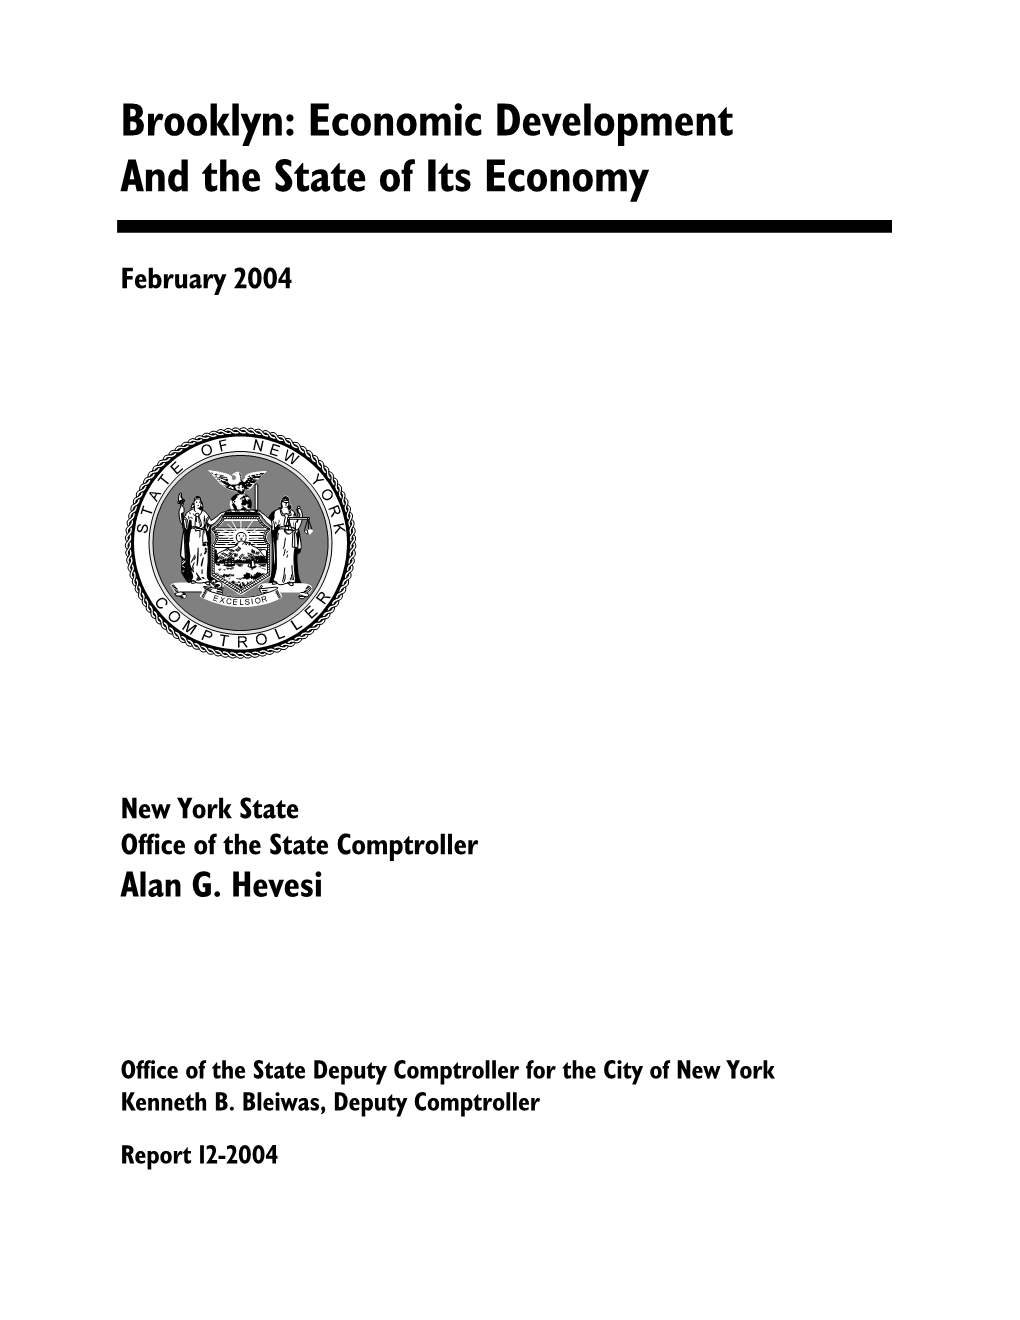 Brooklyn: Economic Development and the State of Its Economy